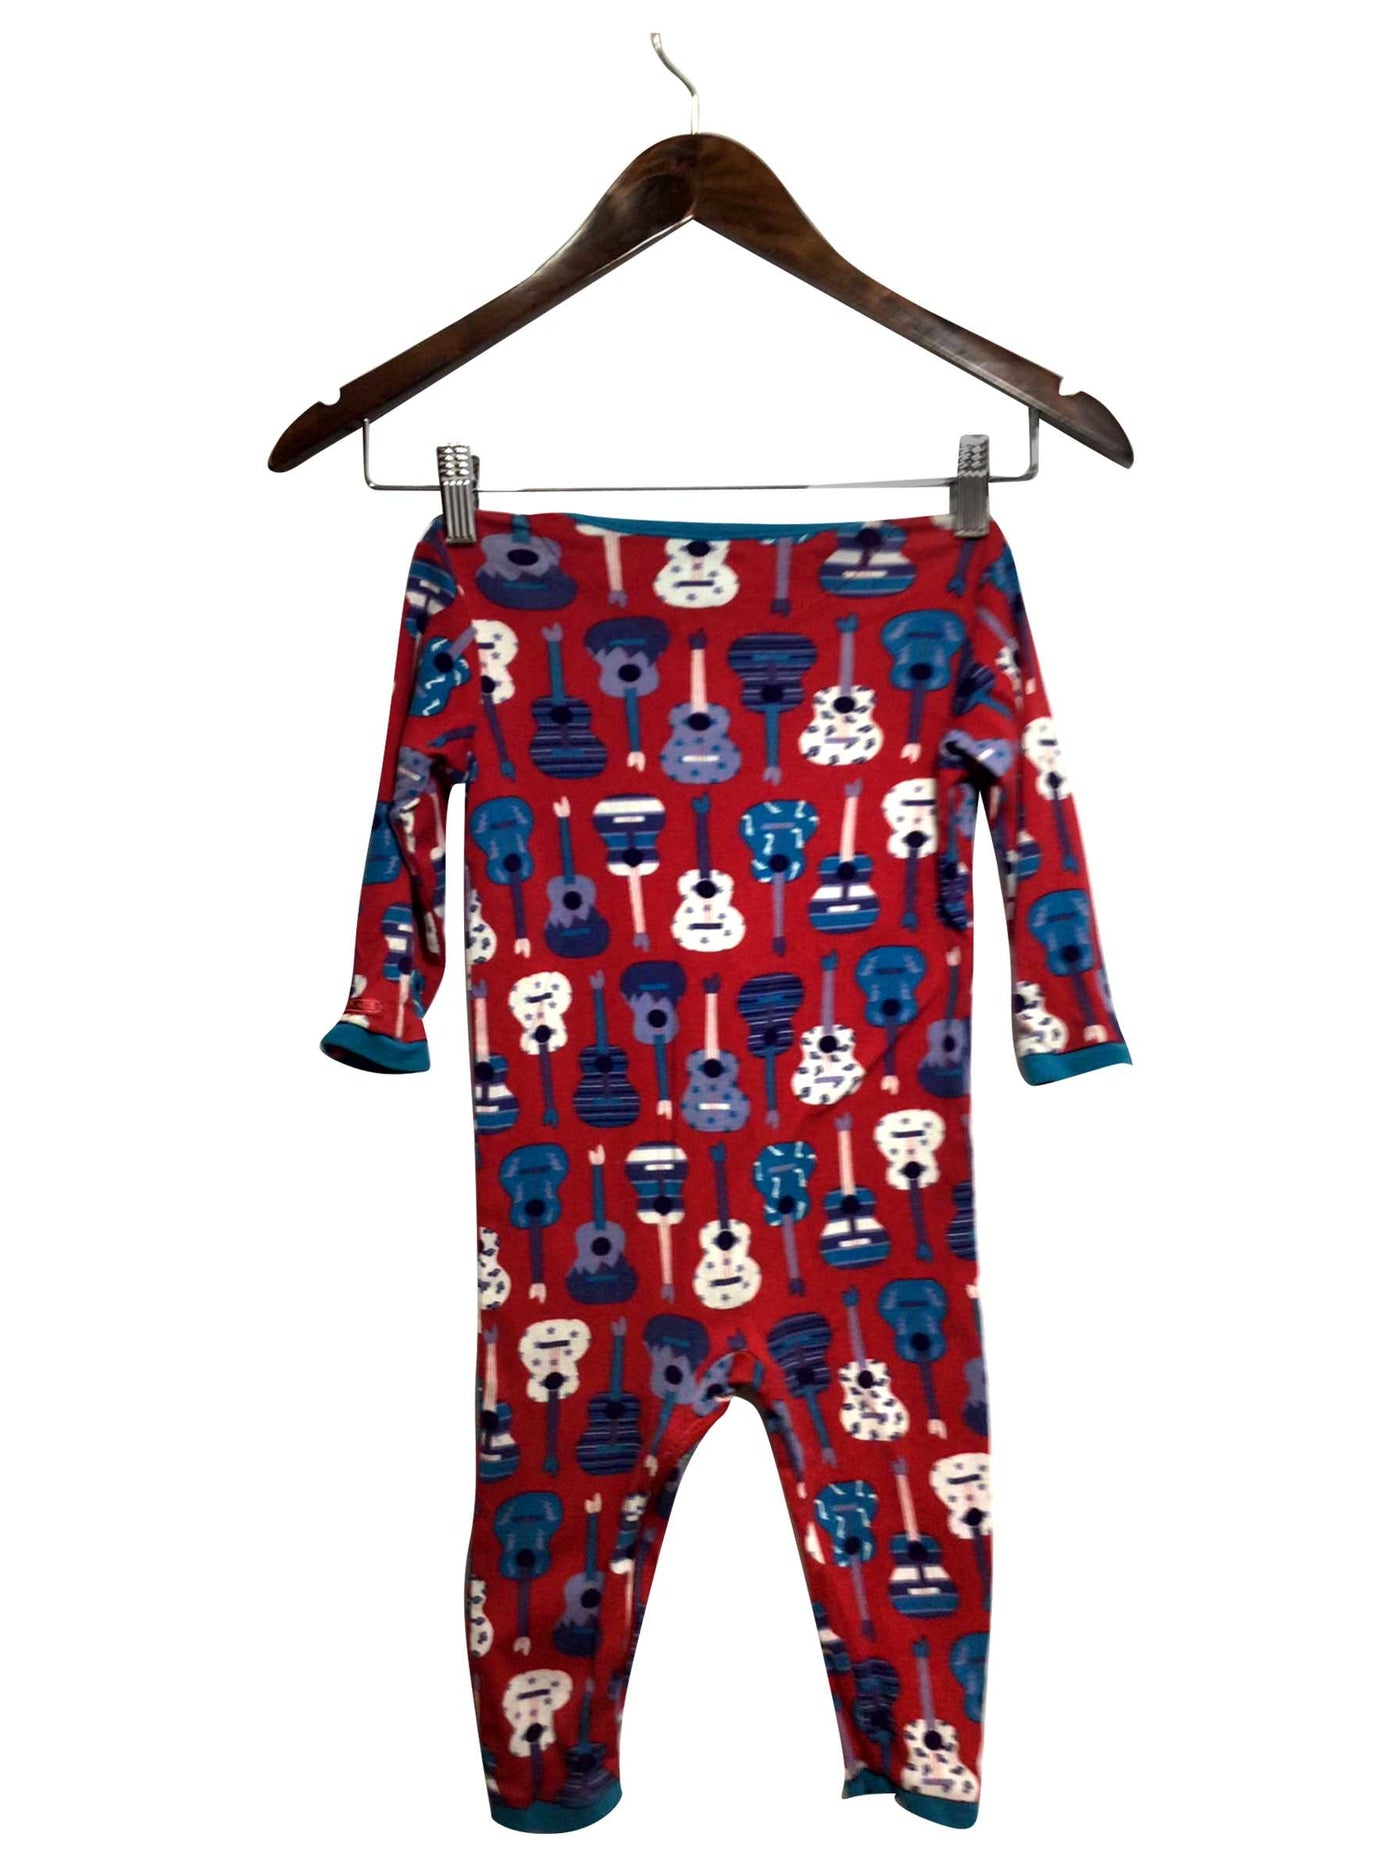 THE CHILDREN'S PLACE Regular fit Pajamas in Red - Size 2T | 7.99 $ KOOP